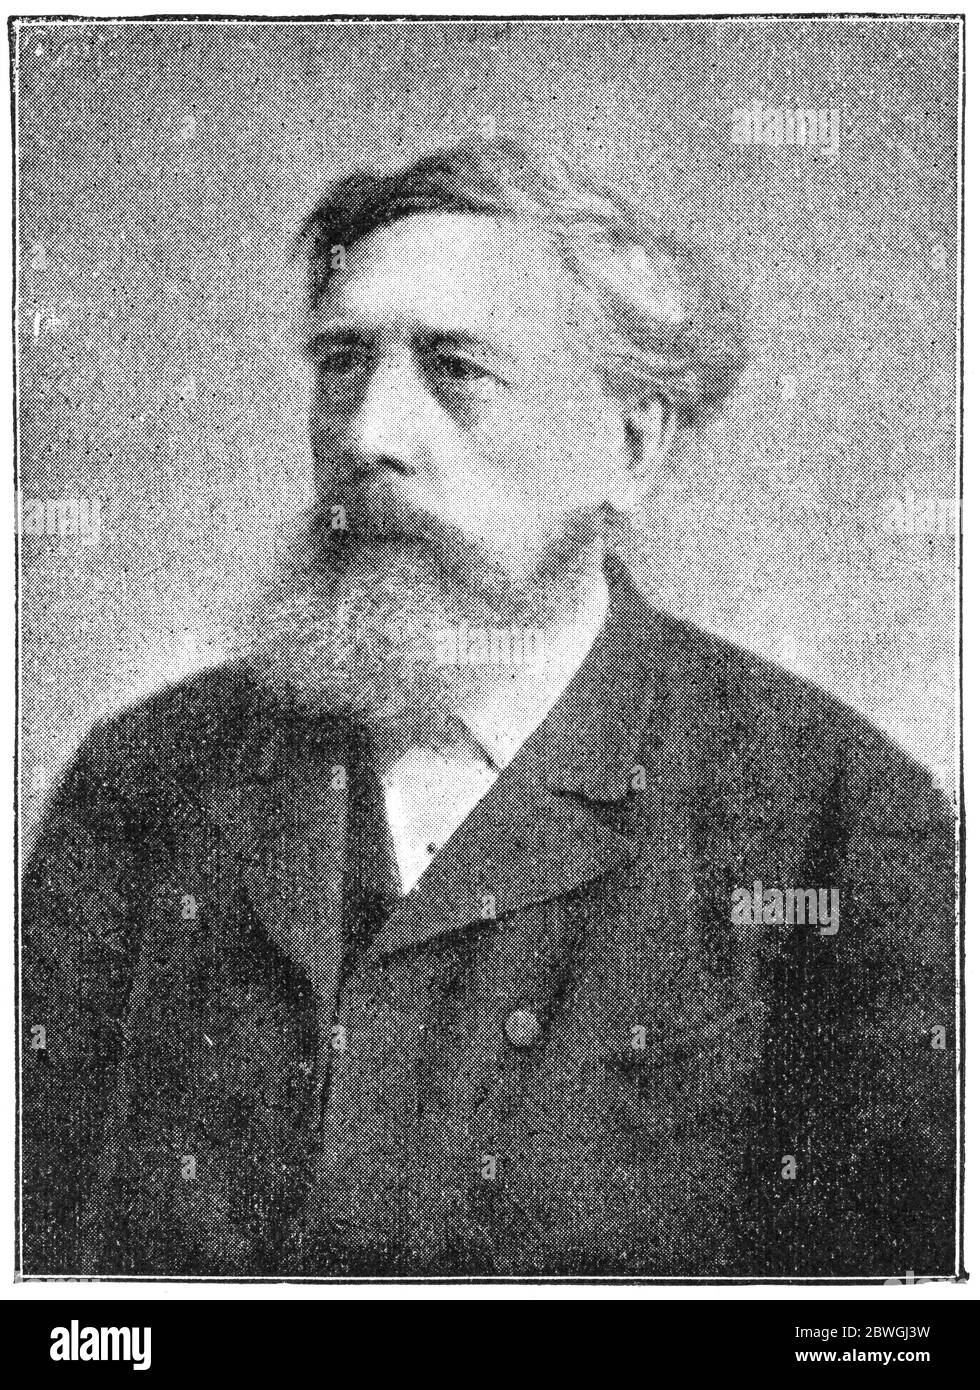 Portrait of Wilhelm Liebknecht - a German socialist and one of the principal founders of the Social Democratic Party of Germany (SPD). Stock Photo